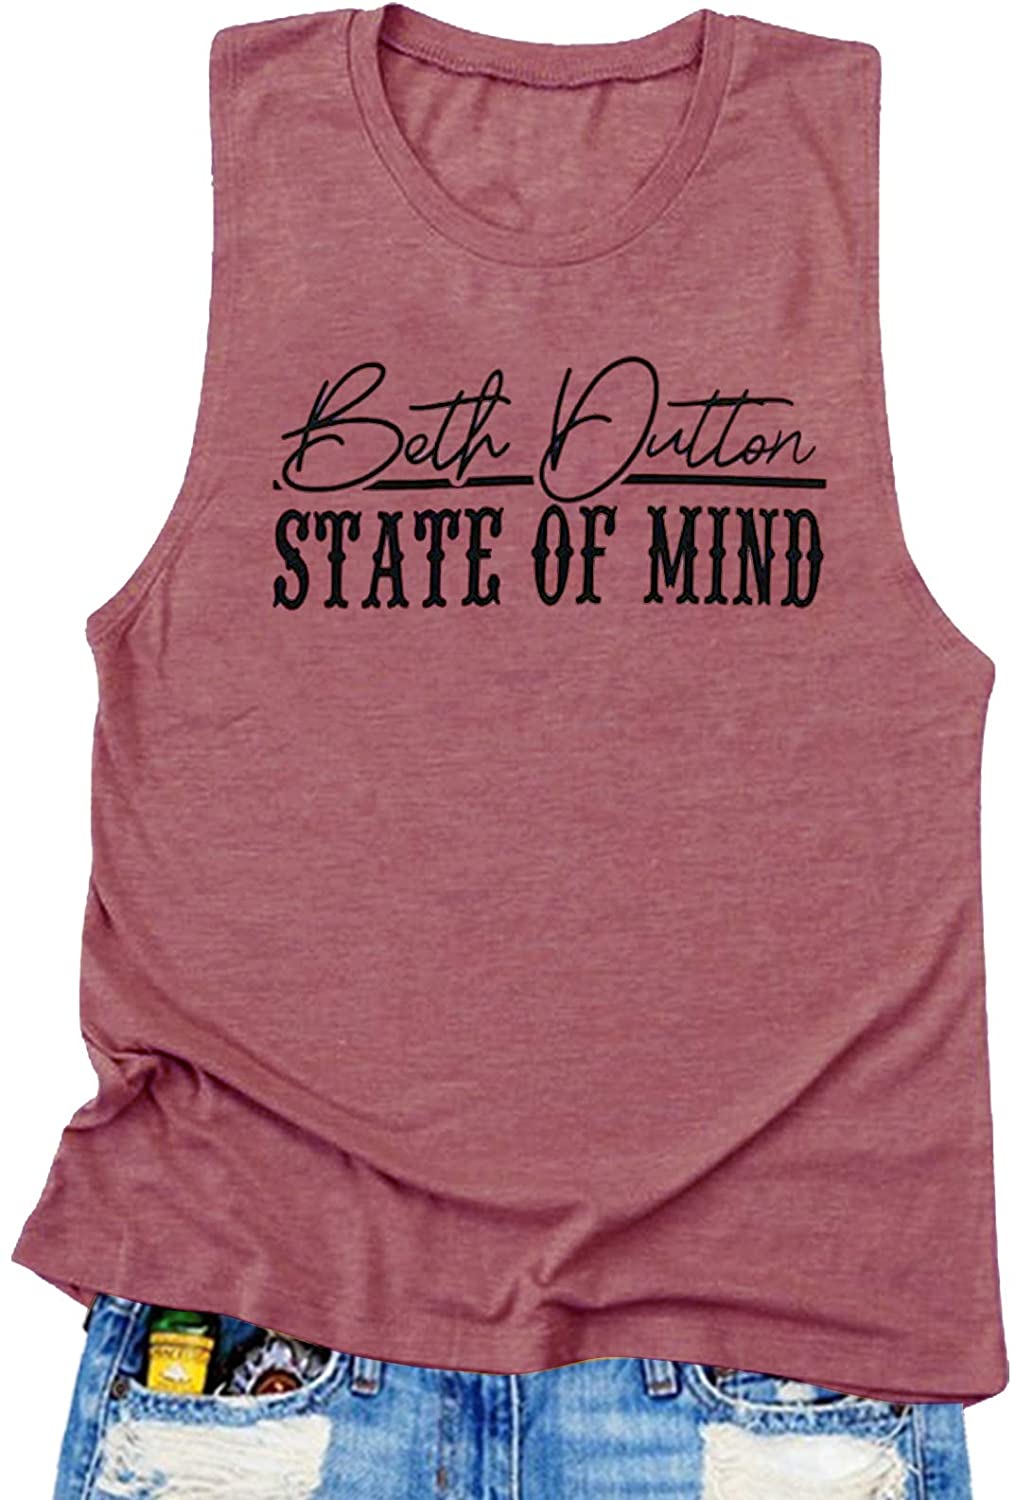 Beth Dutton Tank Tops for Women Vintage Funny Summer Casual Muscle 